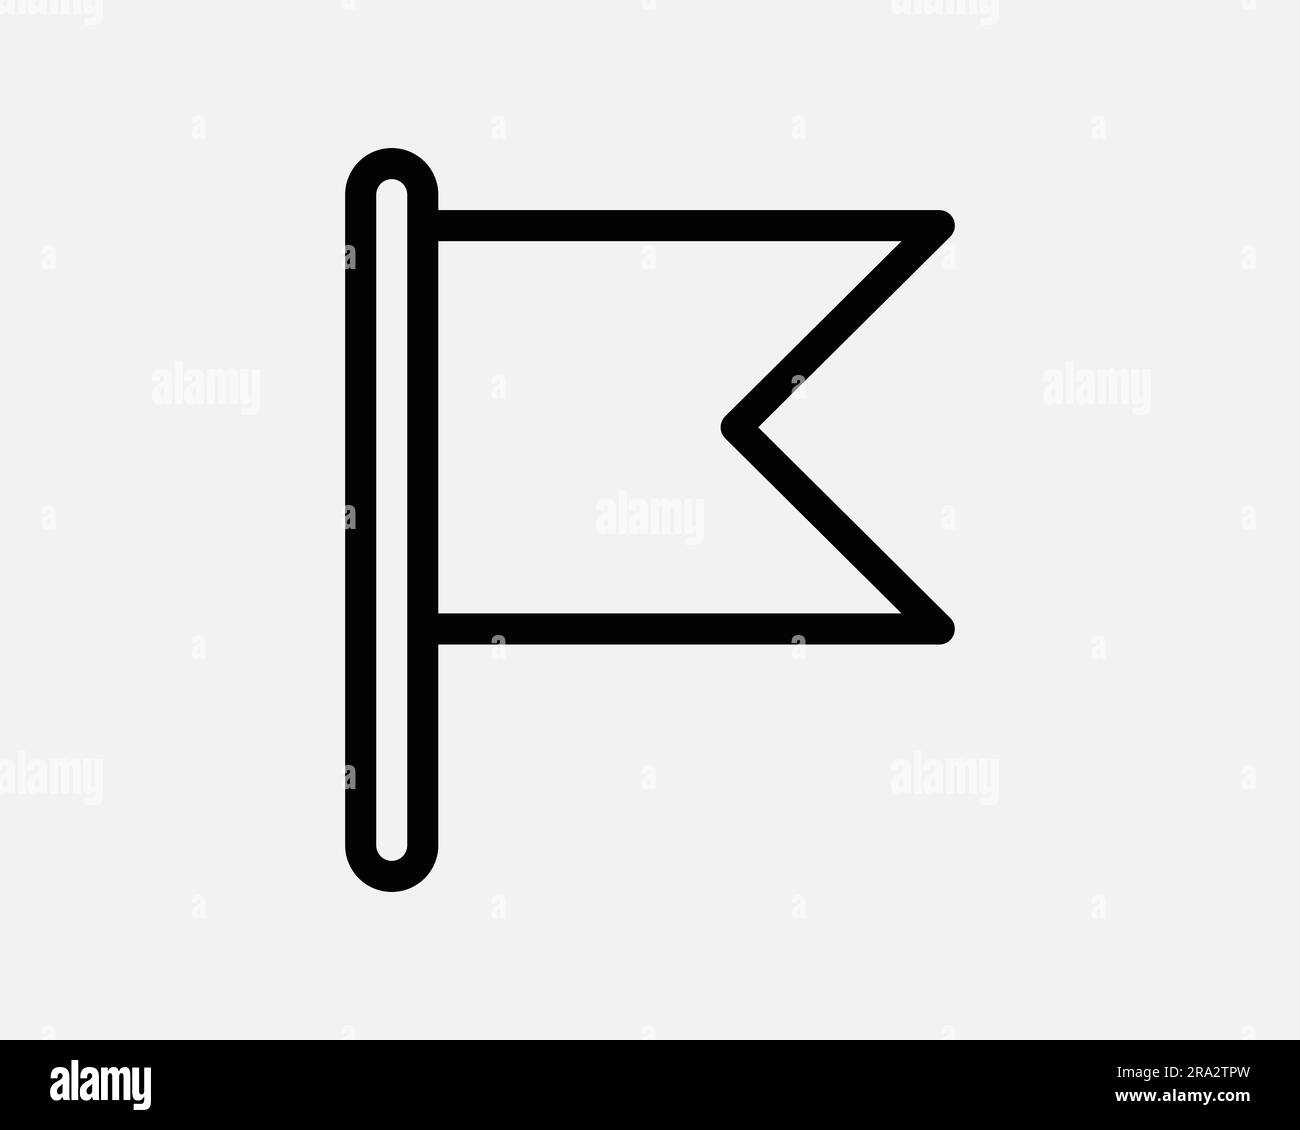 Flag Line Icon. Banner Mark Marker Position Location Pennant Map Point Pointer. Black White Graphic Clipart Artwork Outline Symbol Sign Vector EPS Stock Vector